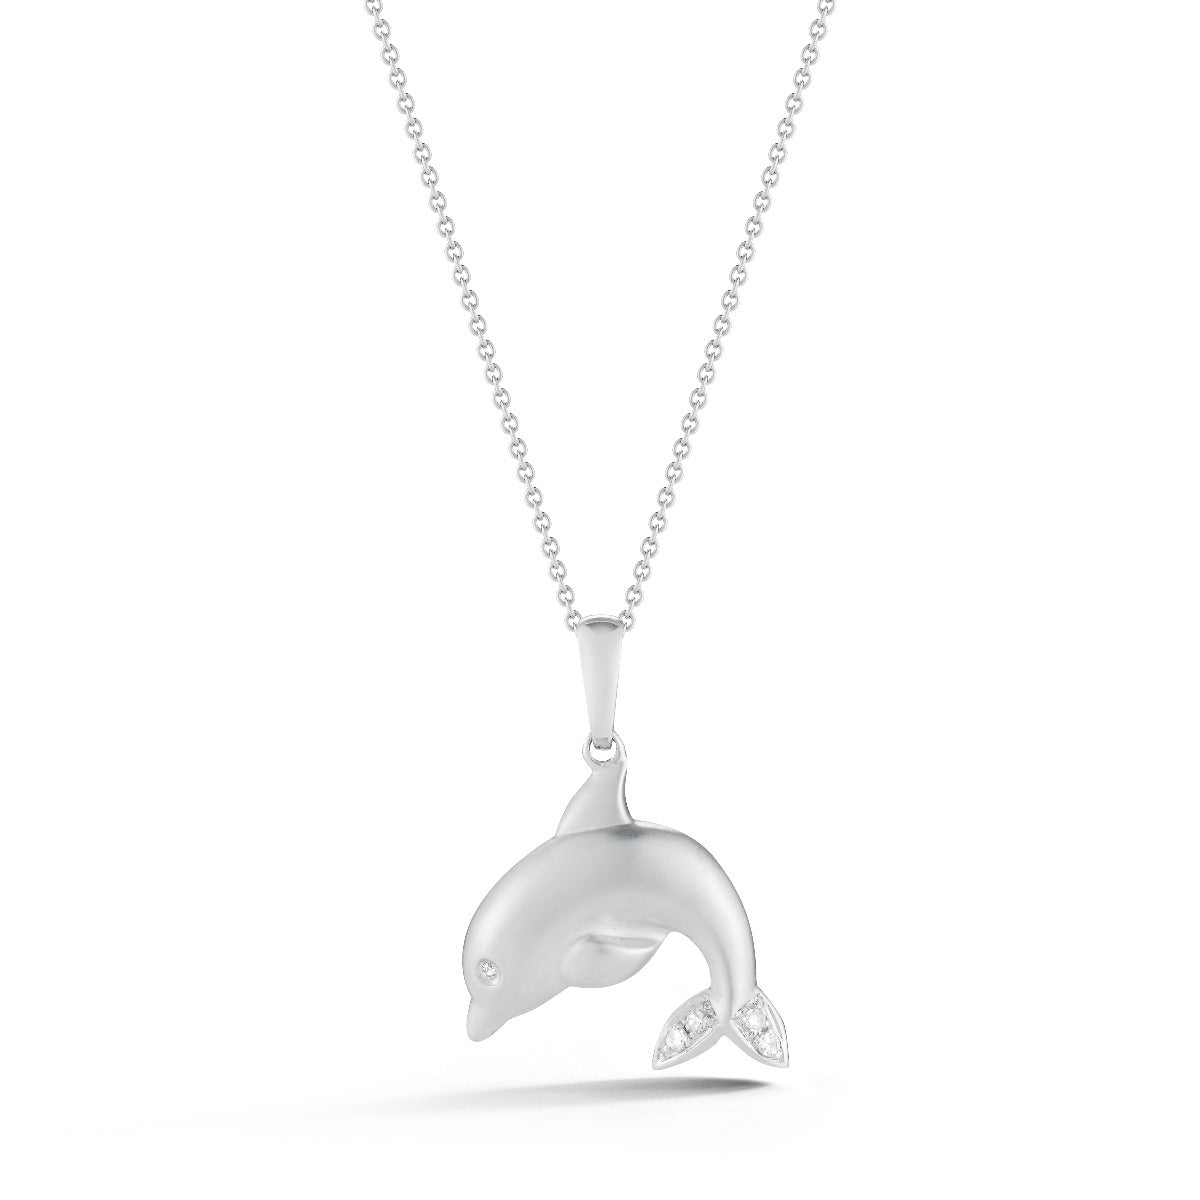 14K DOLPHIN PENDANT WITH 5 DIAMONDS 0.045CT. 3/4" LONG ON 18 INCHES CABLE CHAIN